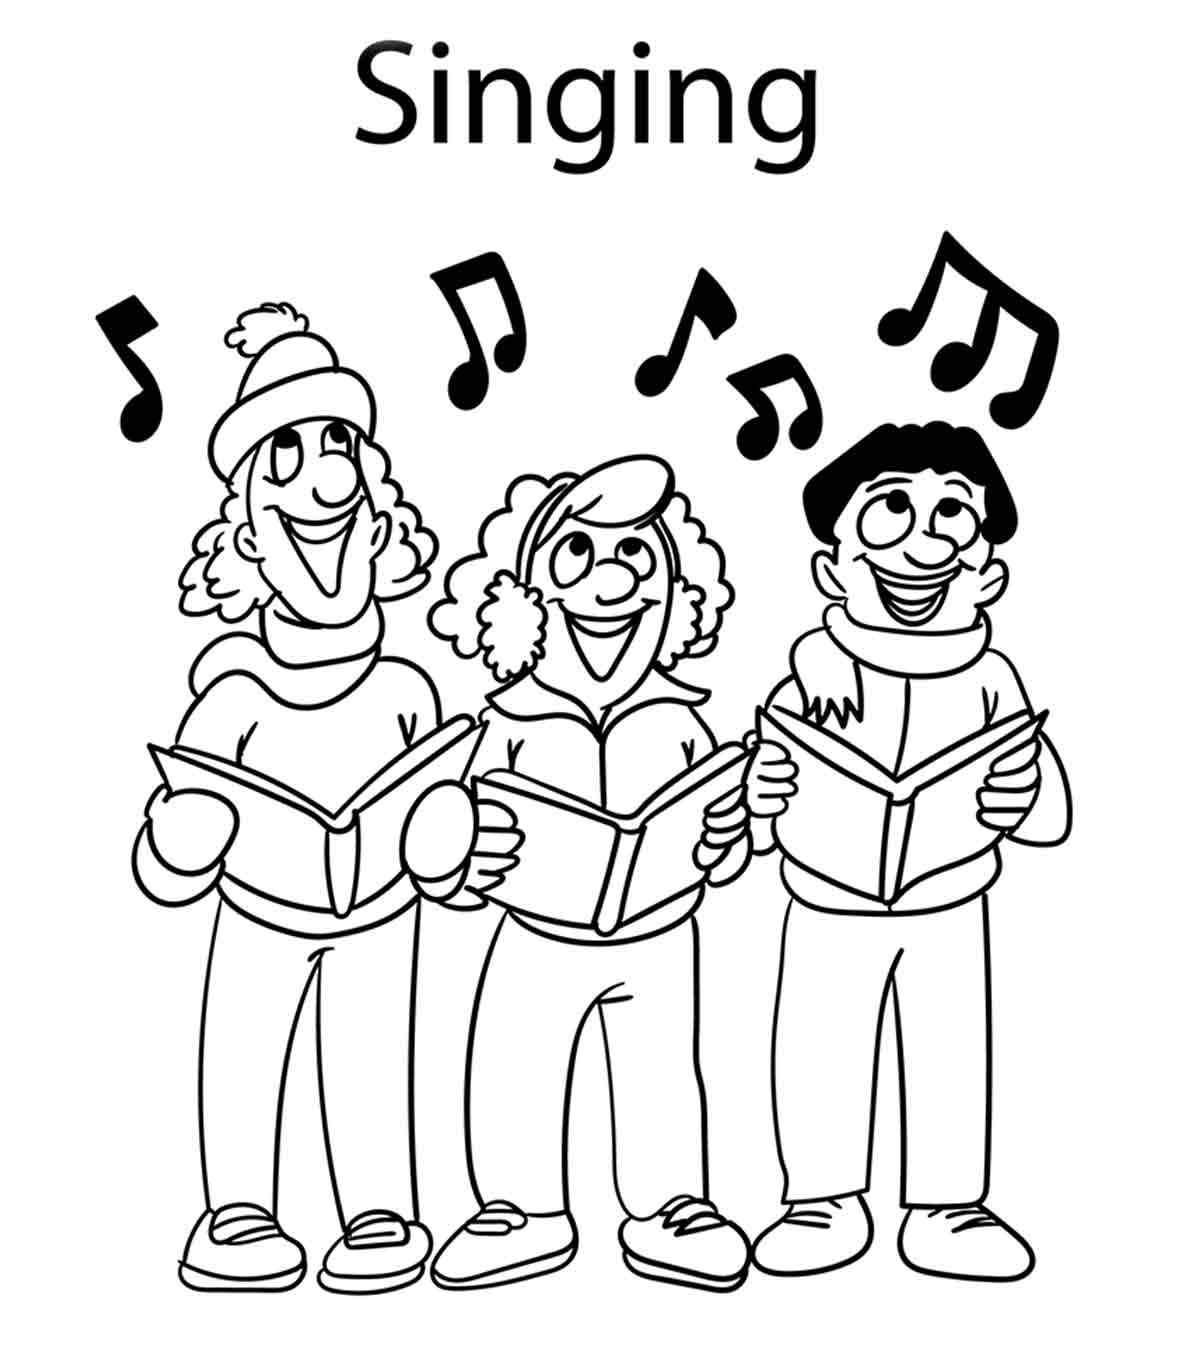 10 Interesting Music Notes Coloring Pages For Your Music Lover Little Kids